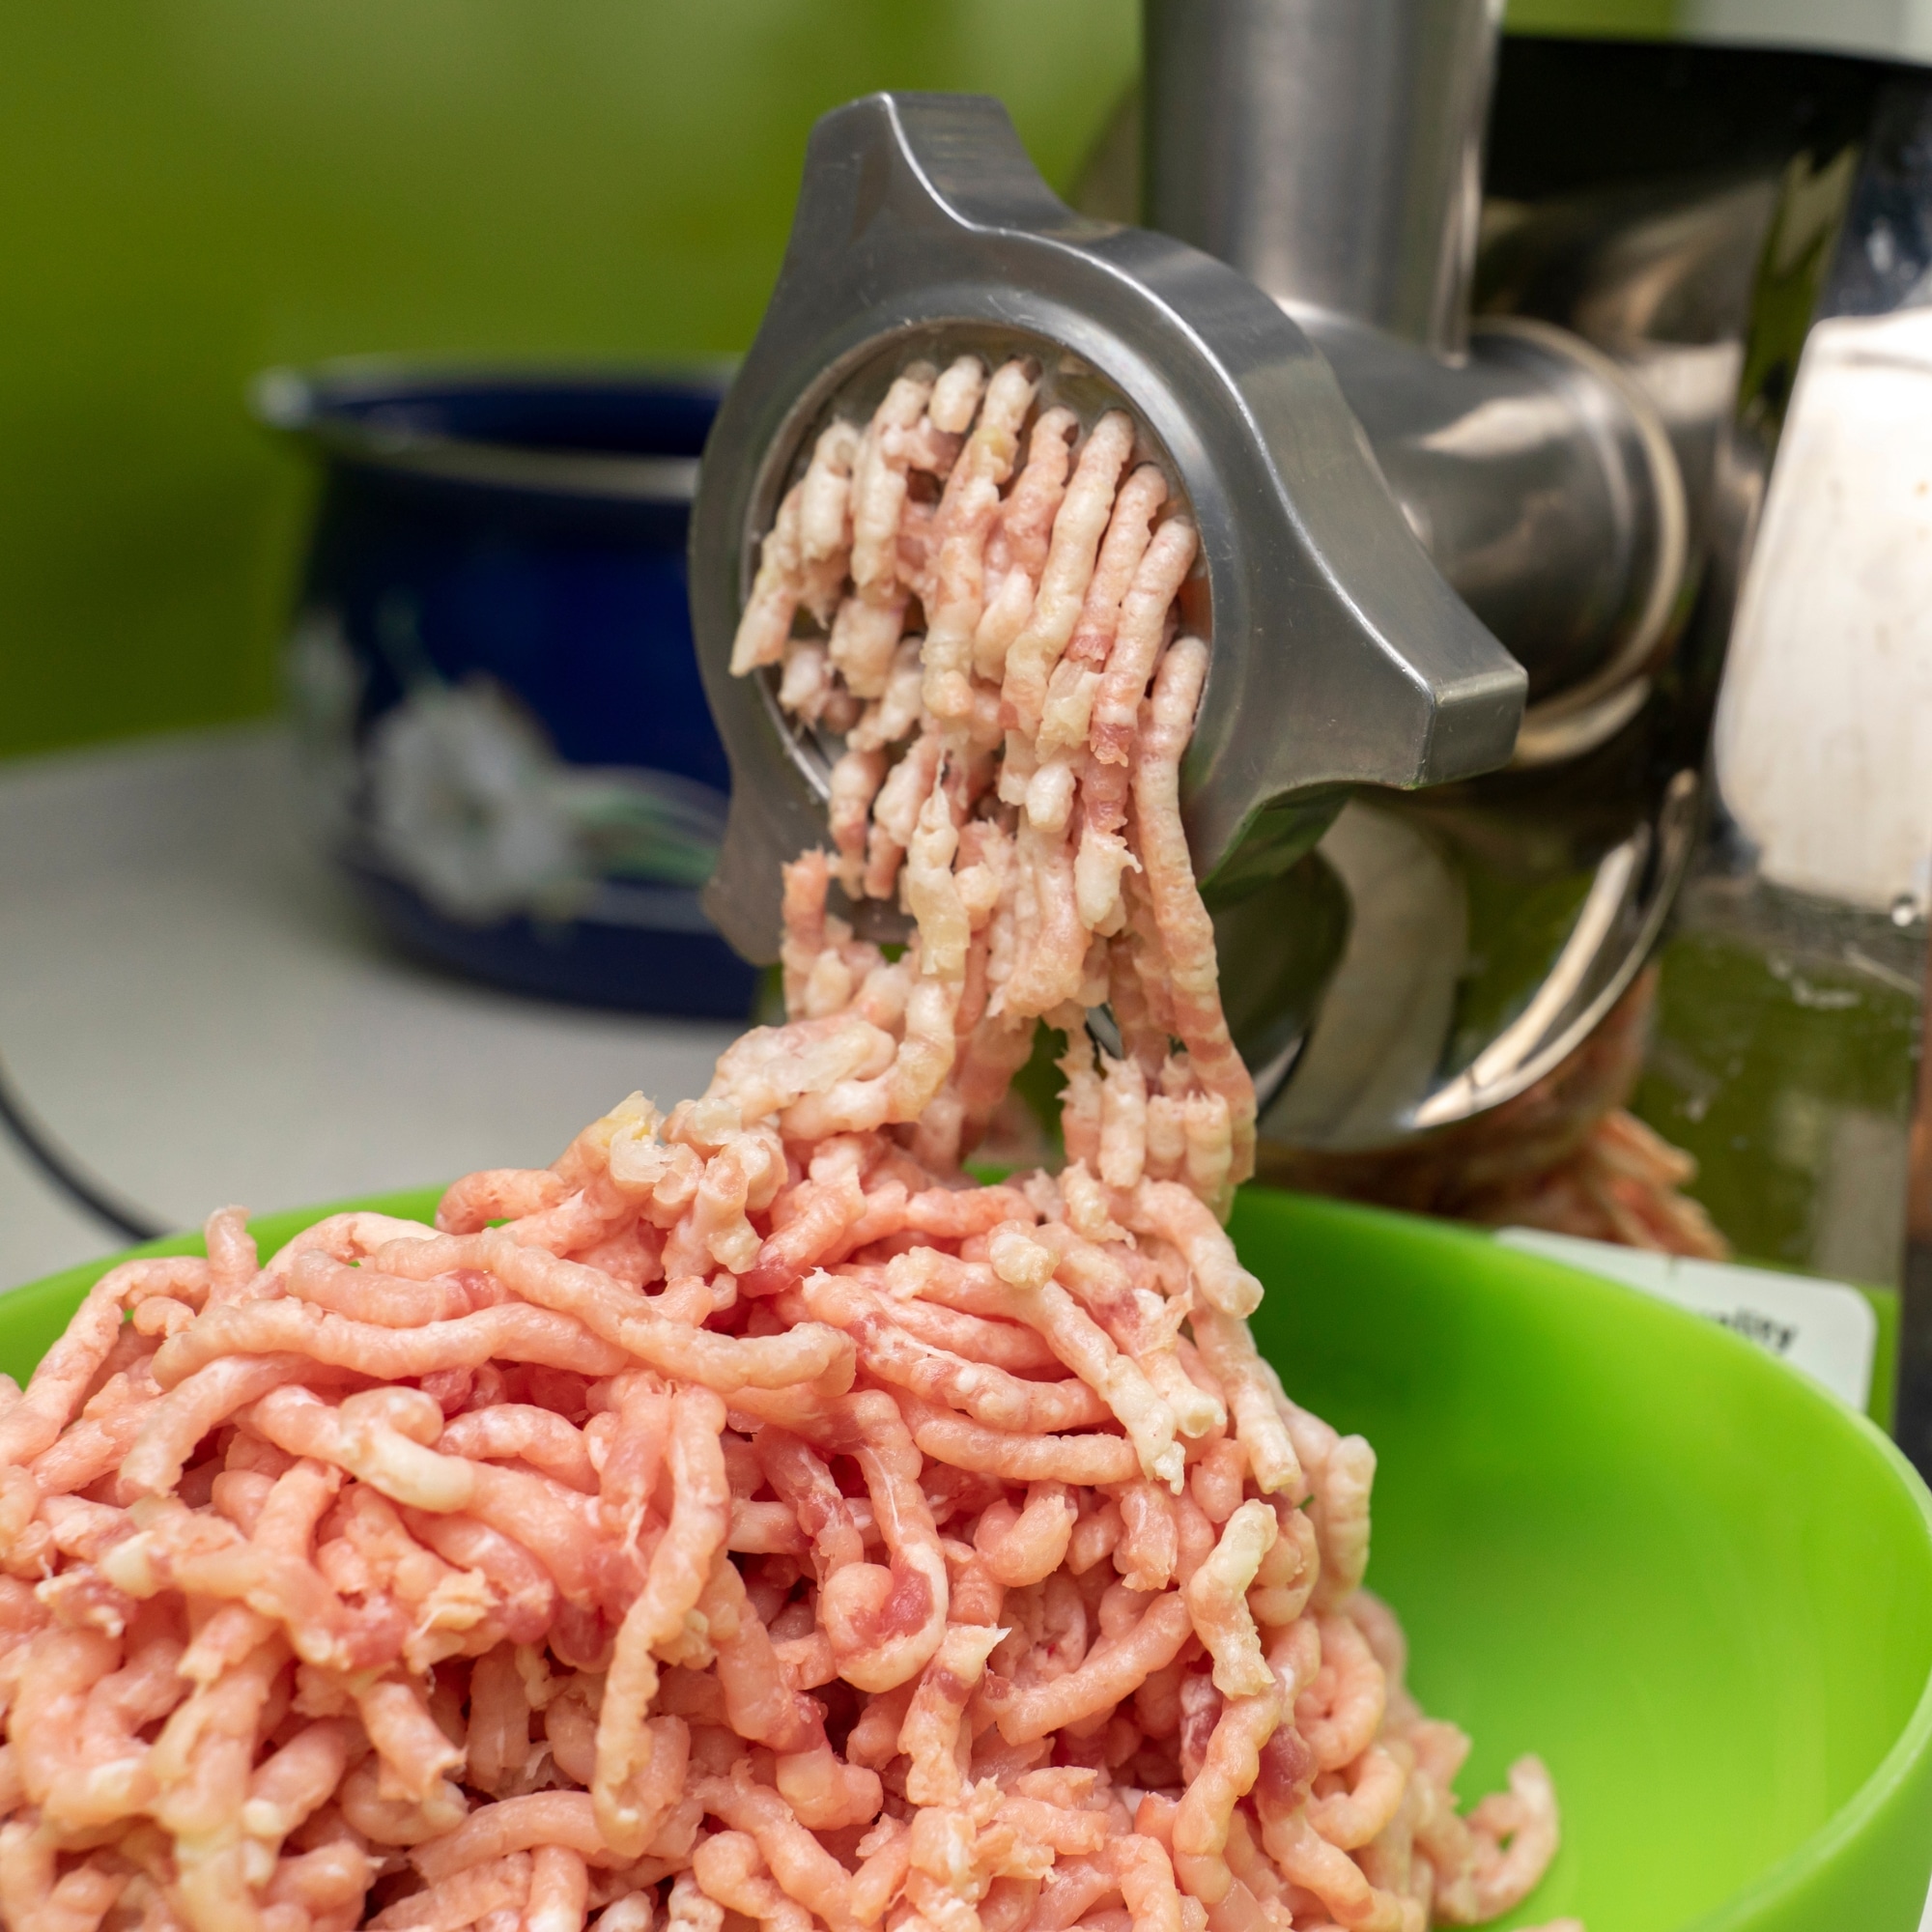 Processing minced meat.